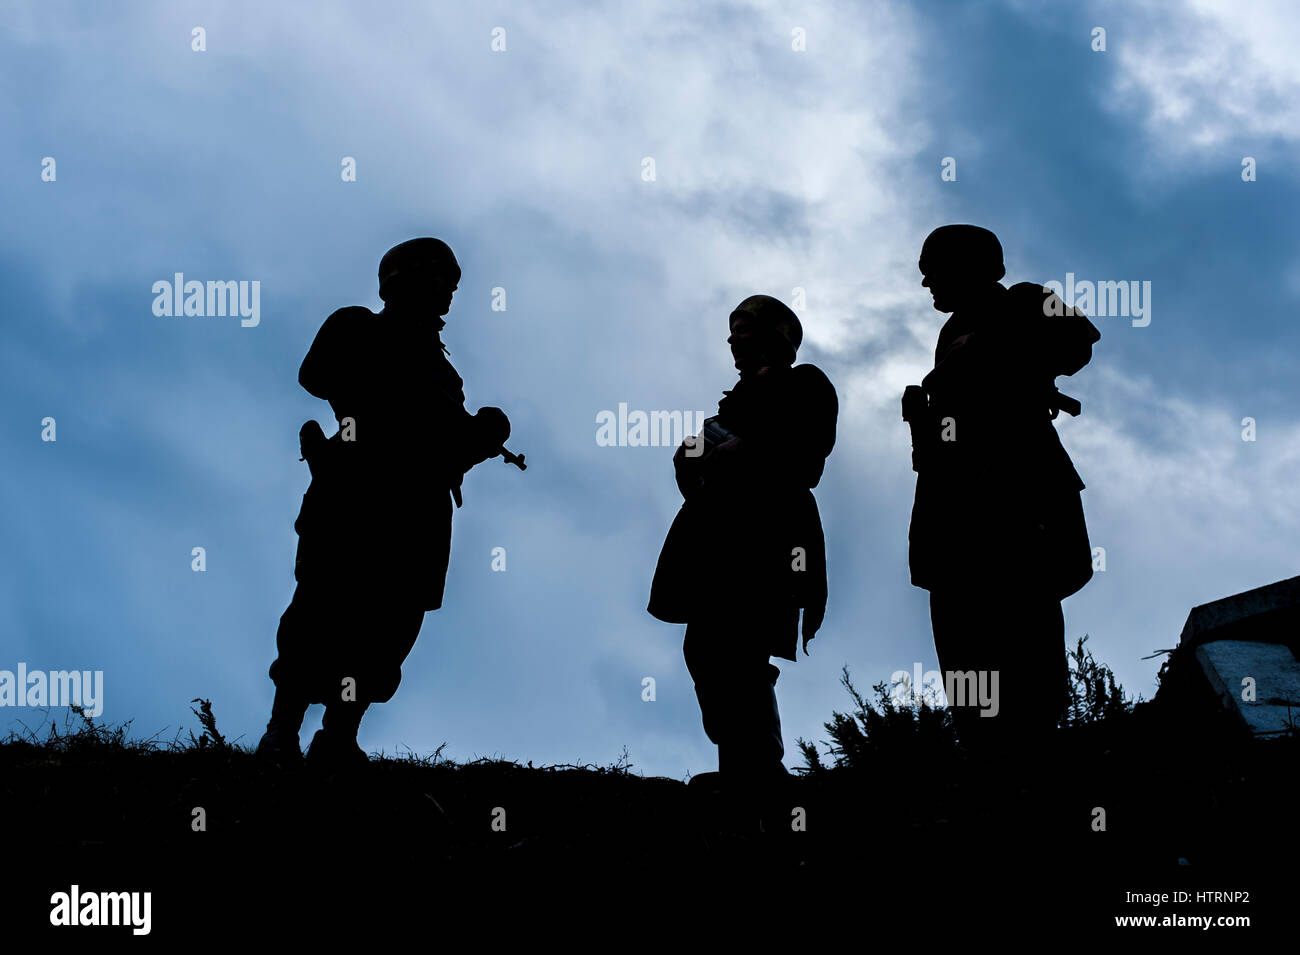 German Fallschirmjager Re-enactors silhouetted against a stormy sky during a battle reenactment at Fort Camden, County Cork, Ireland with copy space. Stock Photo